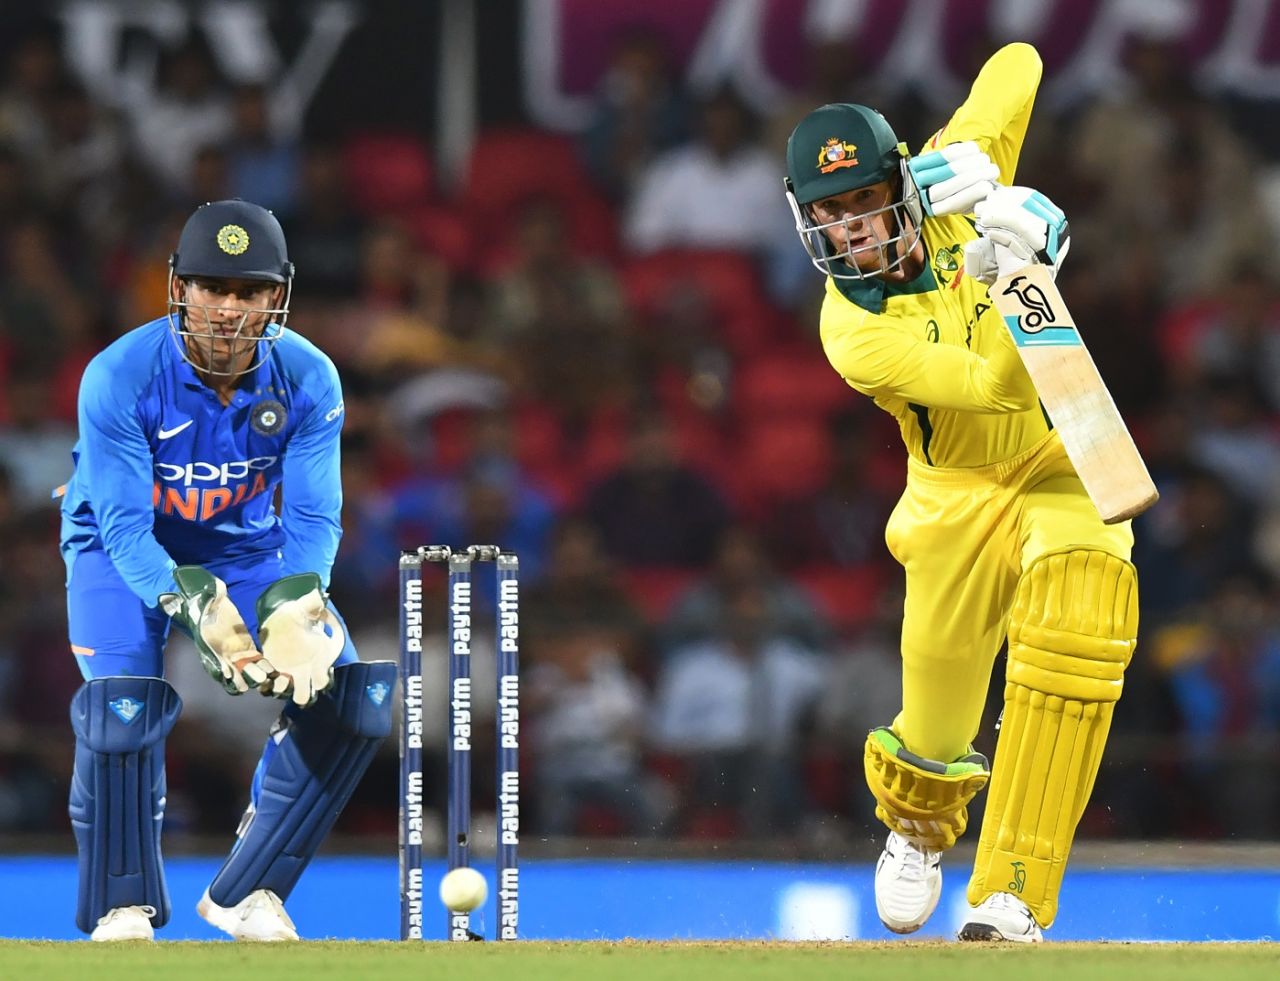 Peter Handscomb punches down the ground, India v Australia, 2nd ODI, Nagpur, March 5, 2019